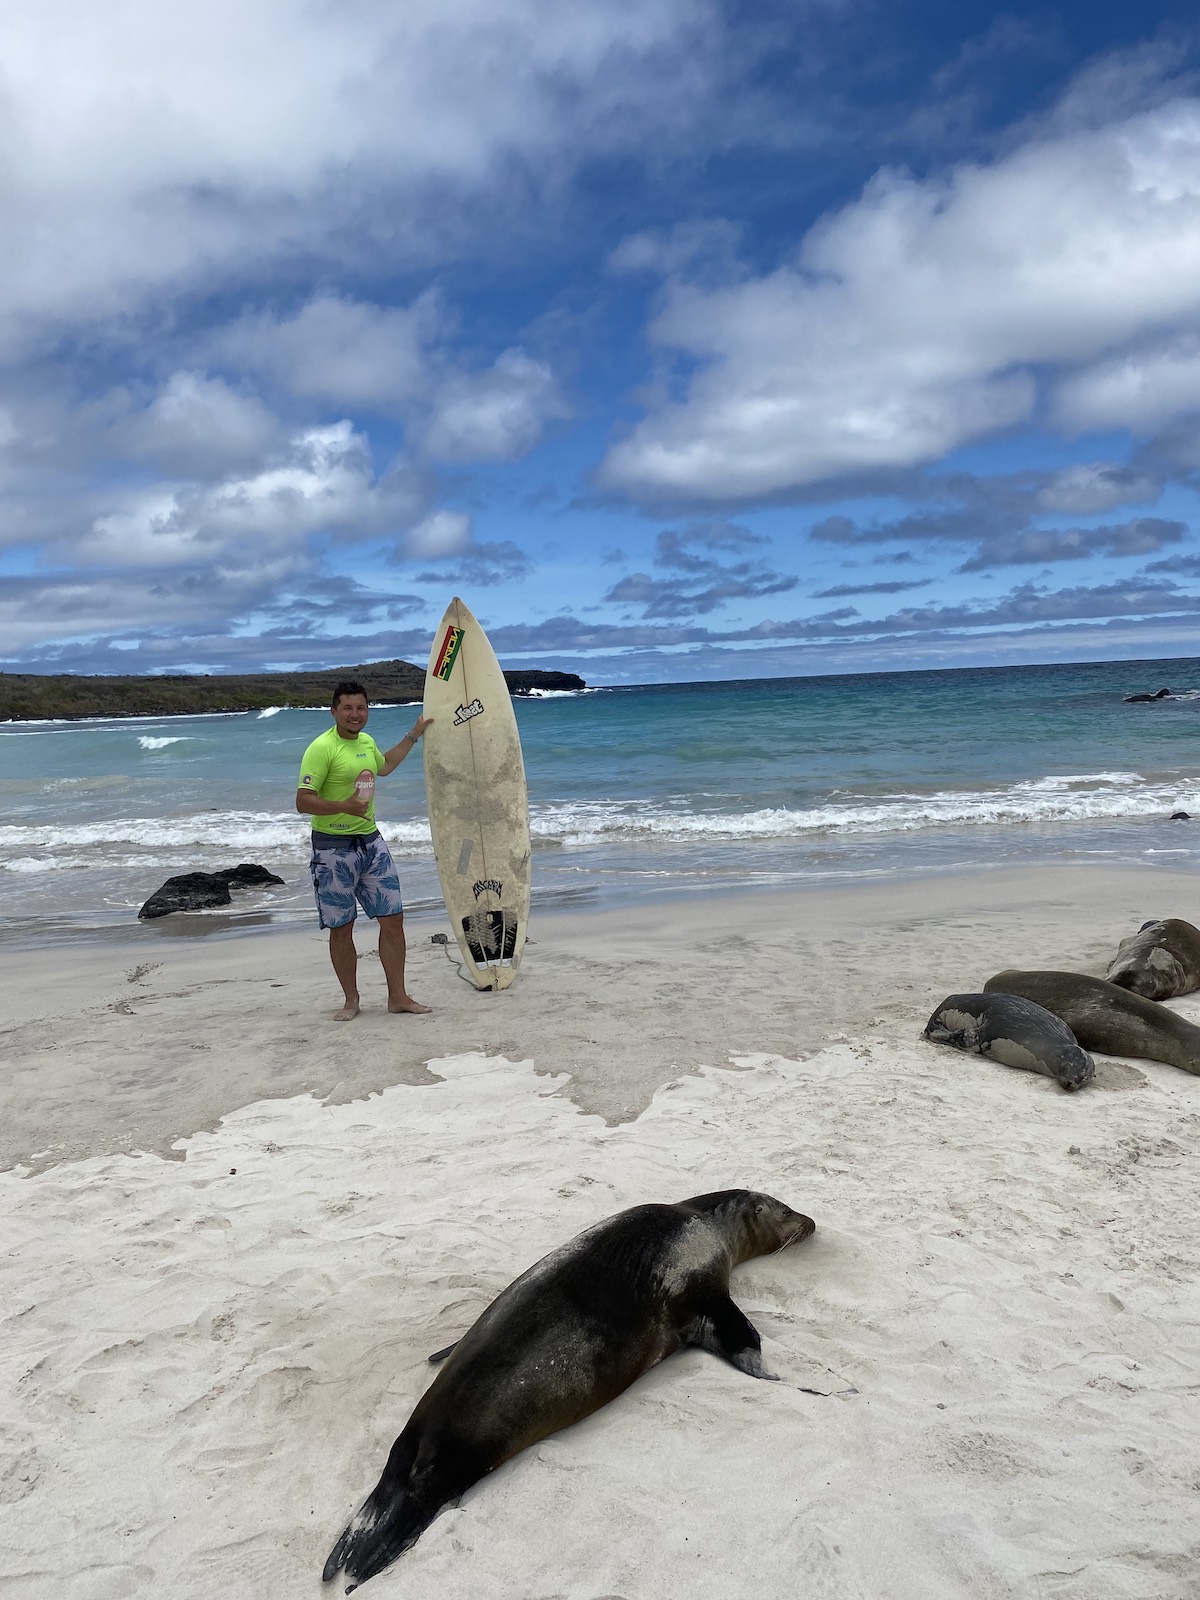 Surfing on Puerto Chino beach on Galapagos